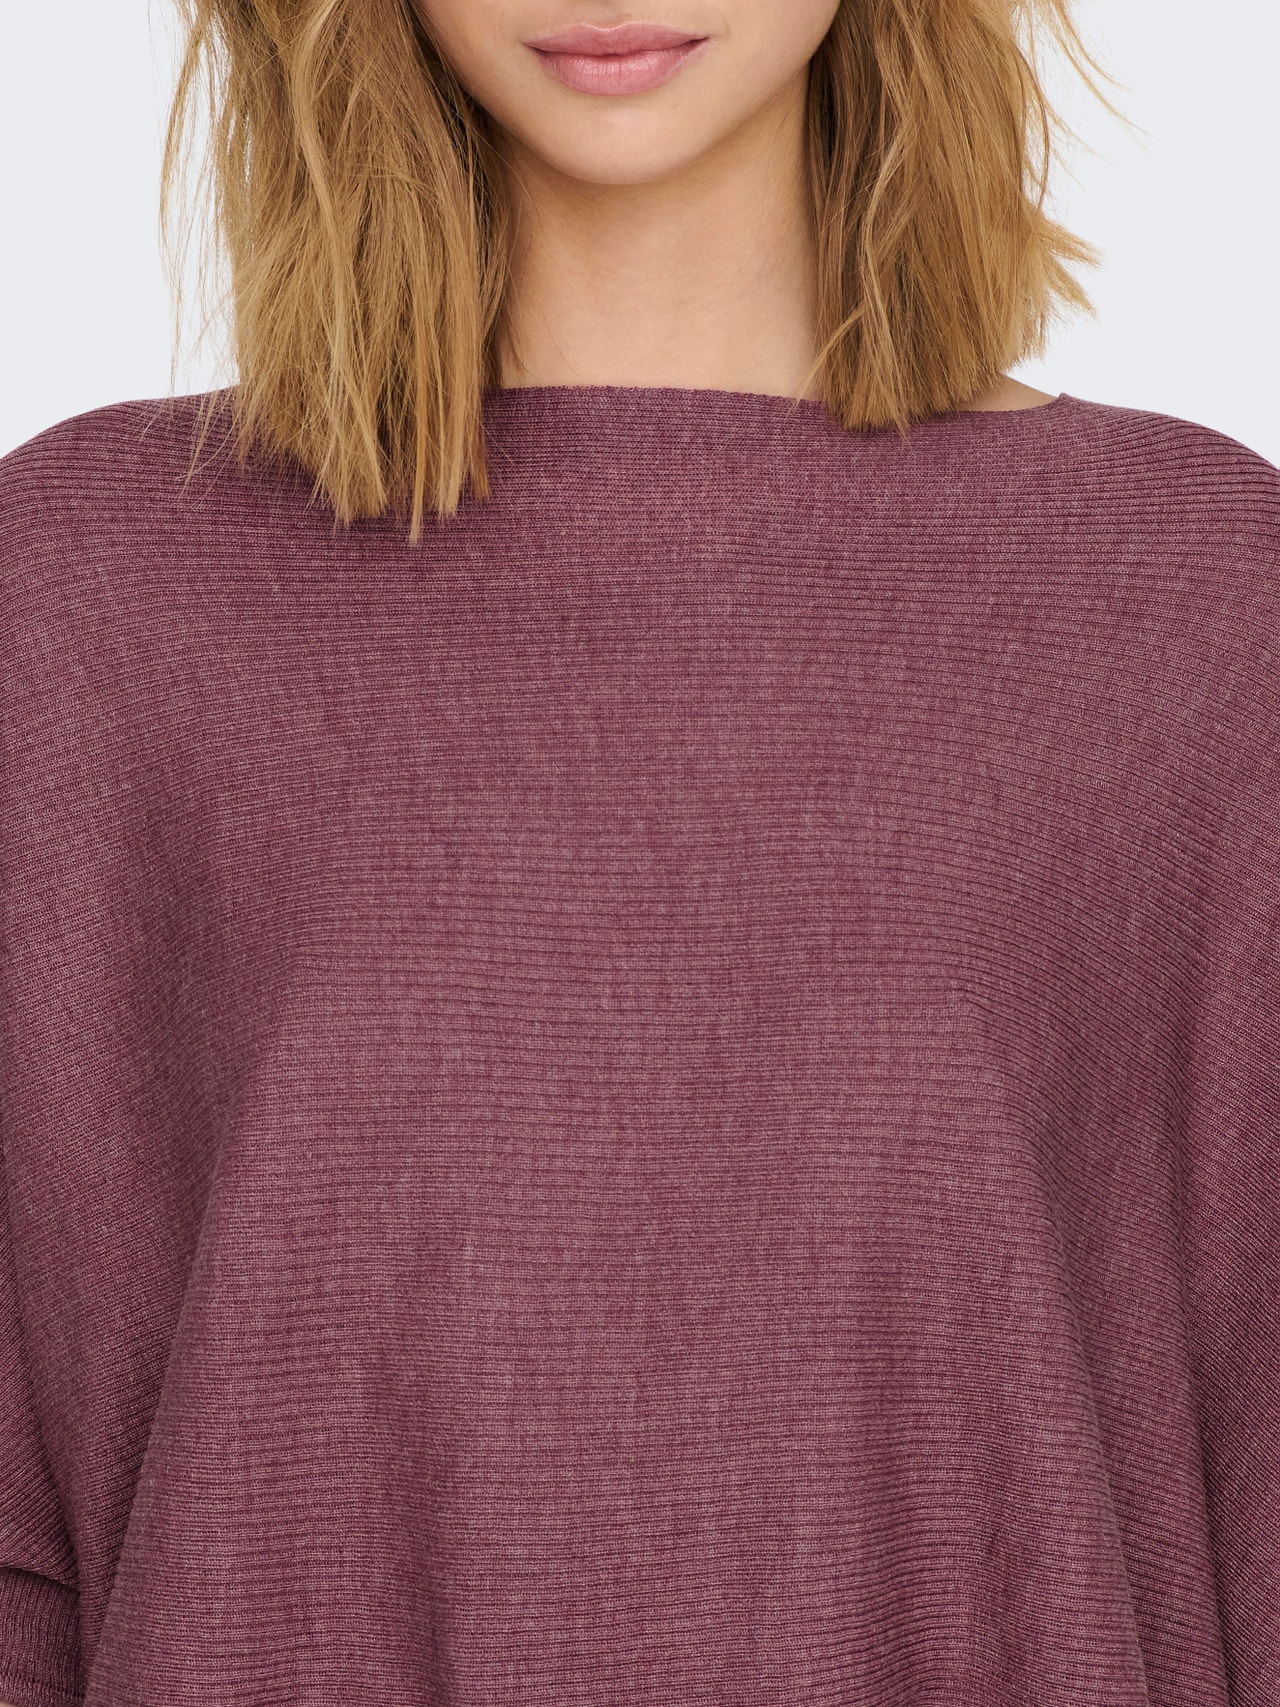 ONLY Boat neck Dropped shoulders Pullover -Crushed Berry - 15181237